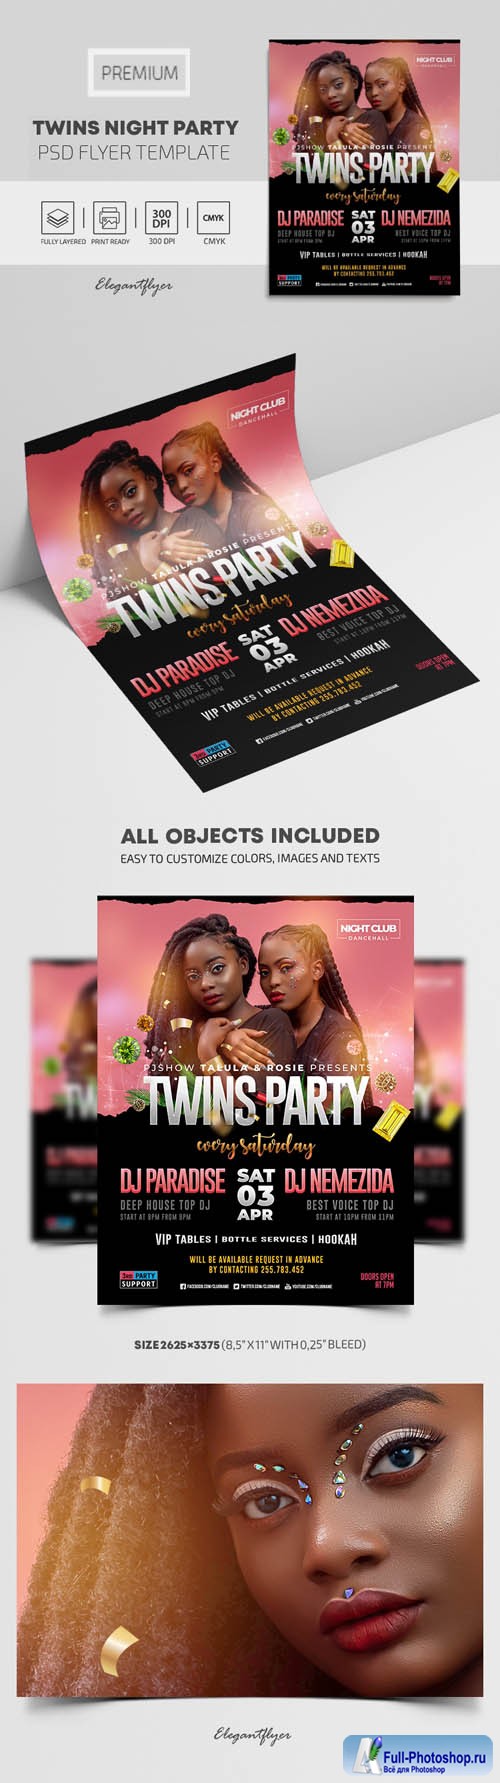 Twins Night Party Premium PSD Flyer Template